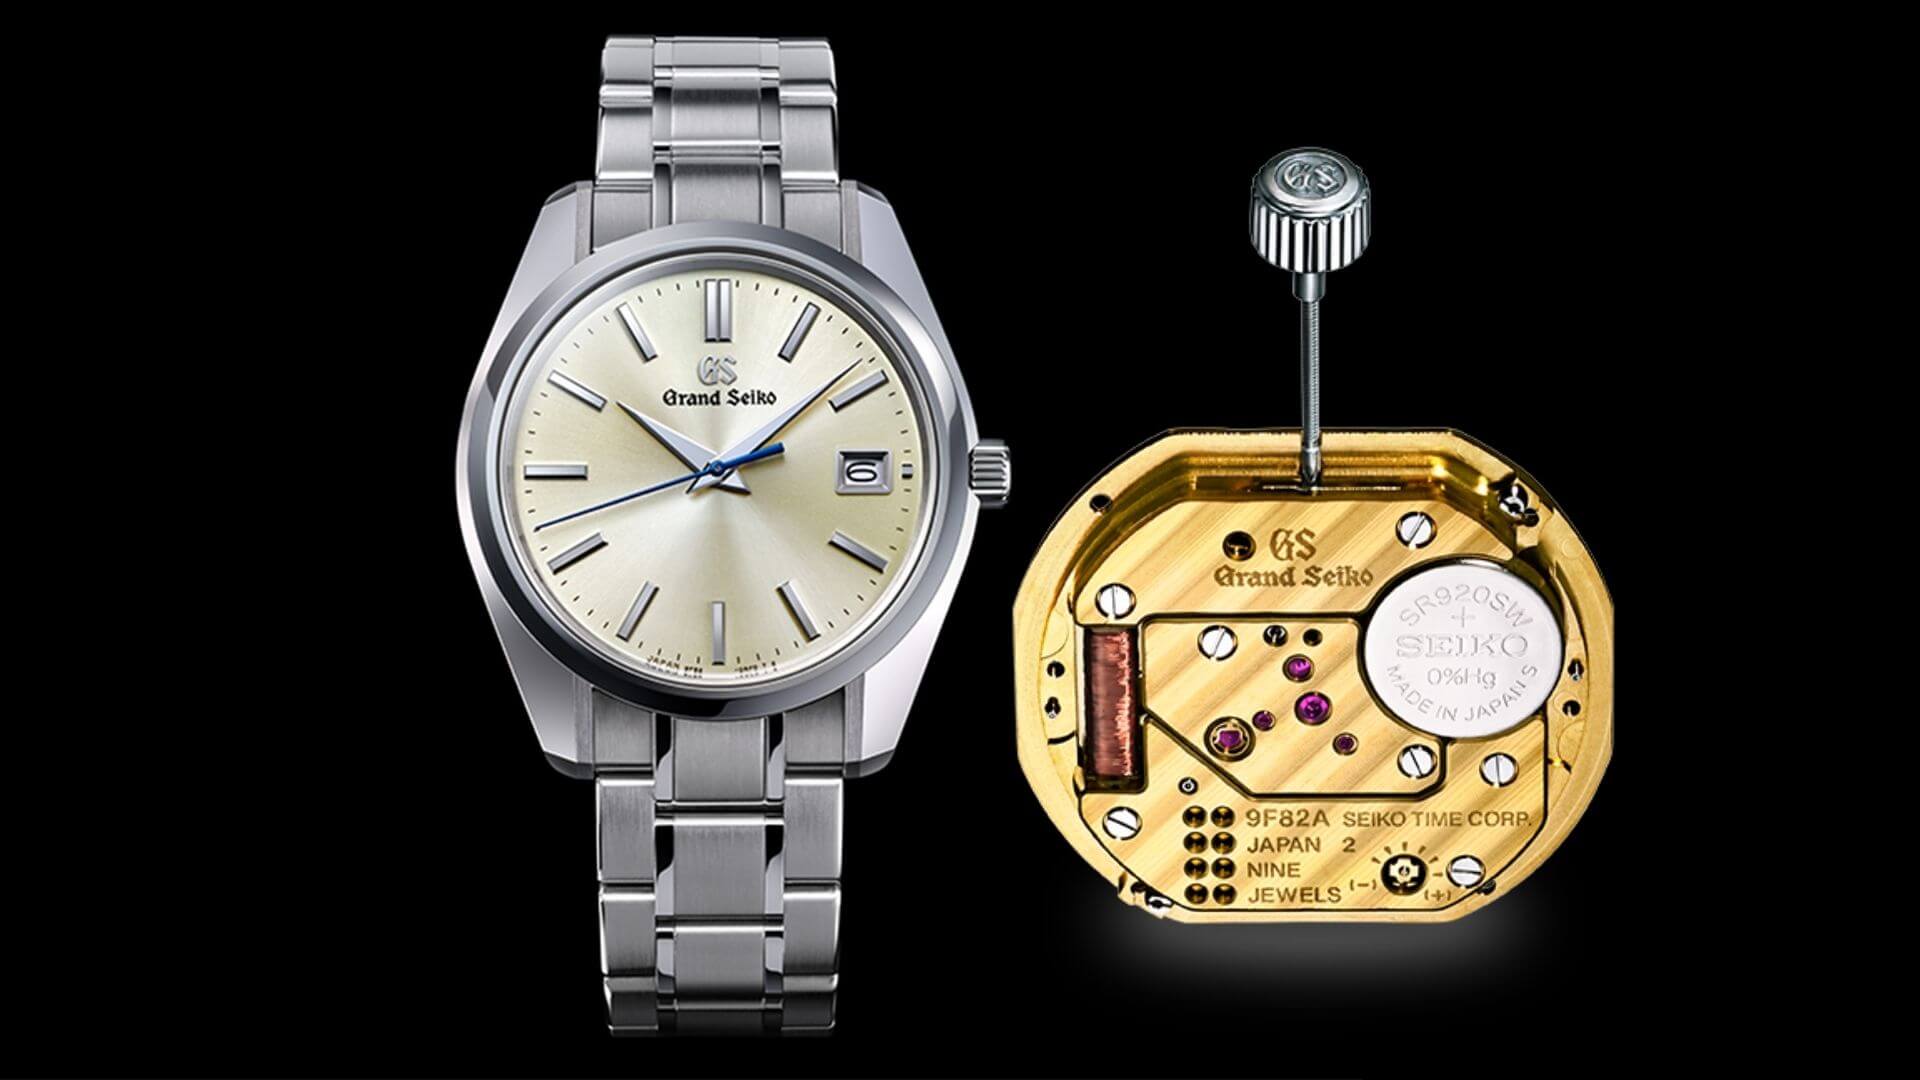 sponsor wraak Absoluut Quartz, automatic or manual-wound? Different watch movements explained